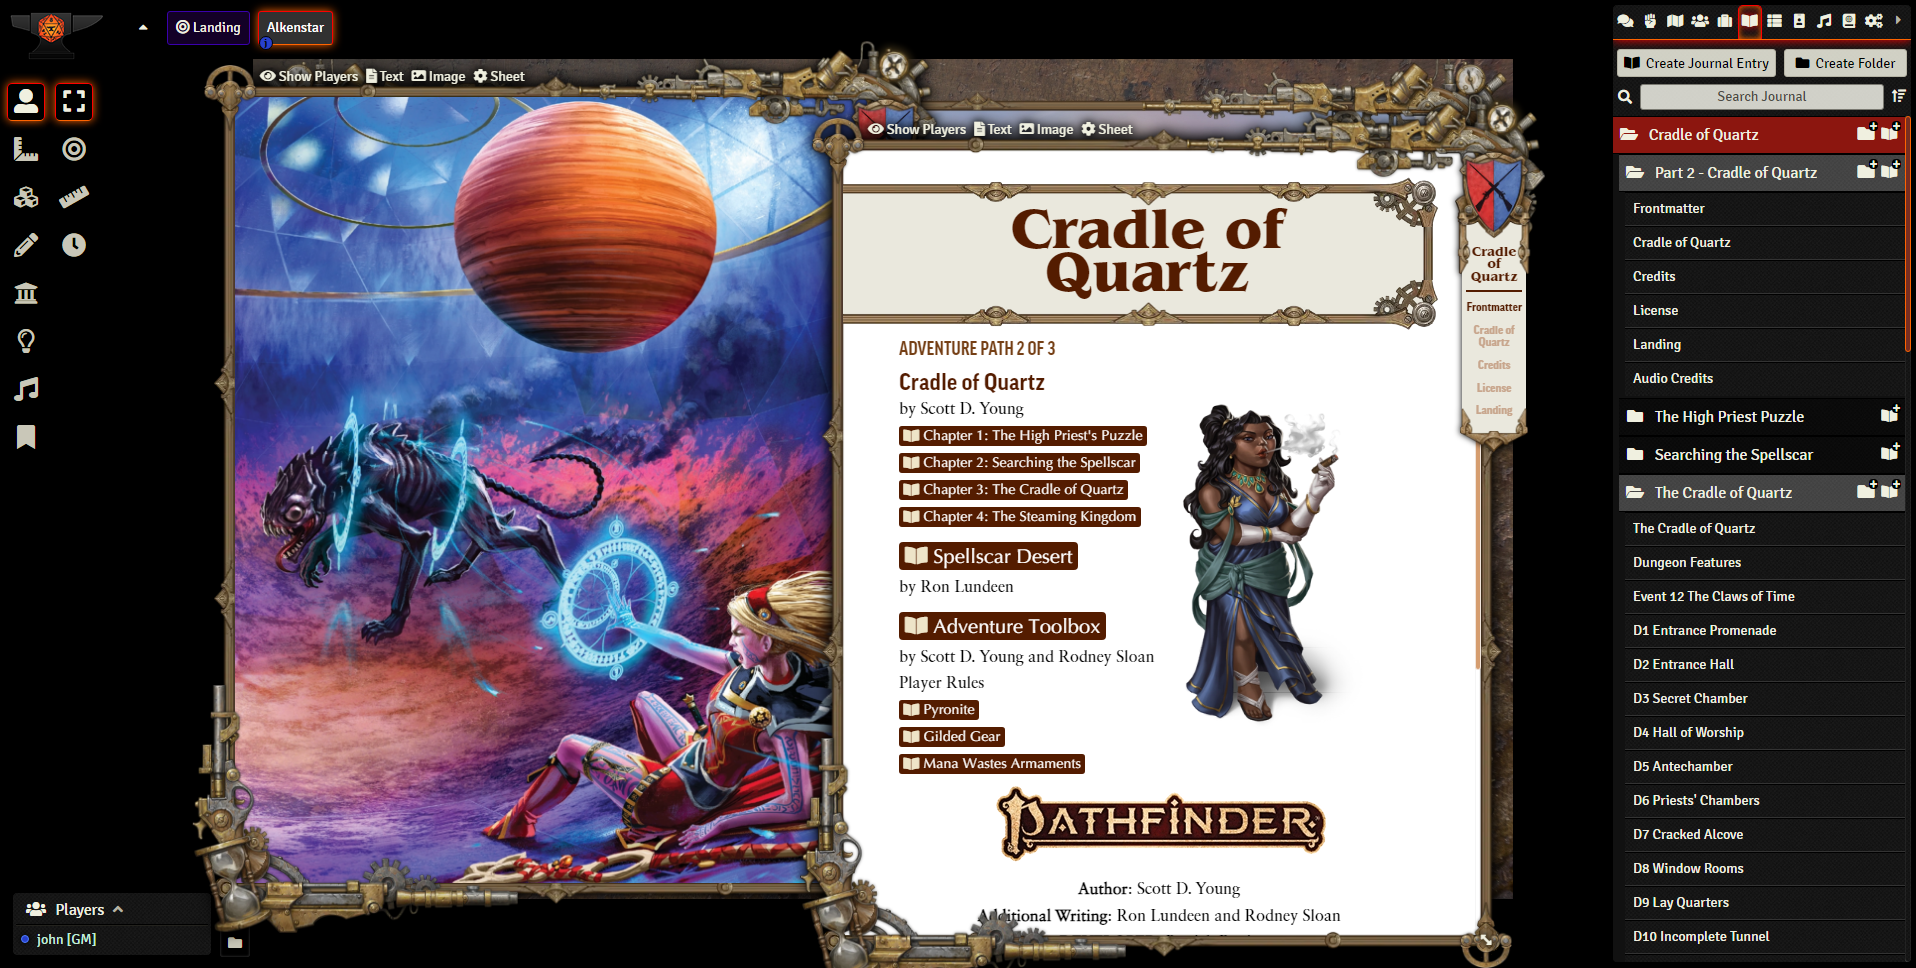 A journal entry shows an image of Seoni, the iconic sorcerer, prone on the ground beneath a gigantic planet-like sphere as she uses her magic to ensnare an attacking dog-like creature. To the right, the title 'Cradle of Quartz' appears above a table of contents.